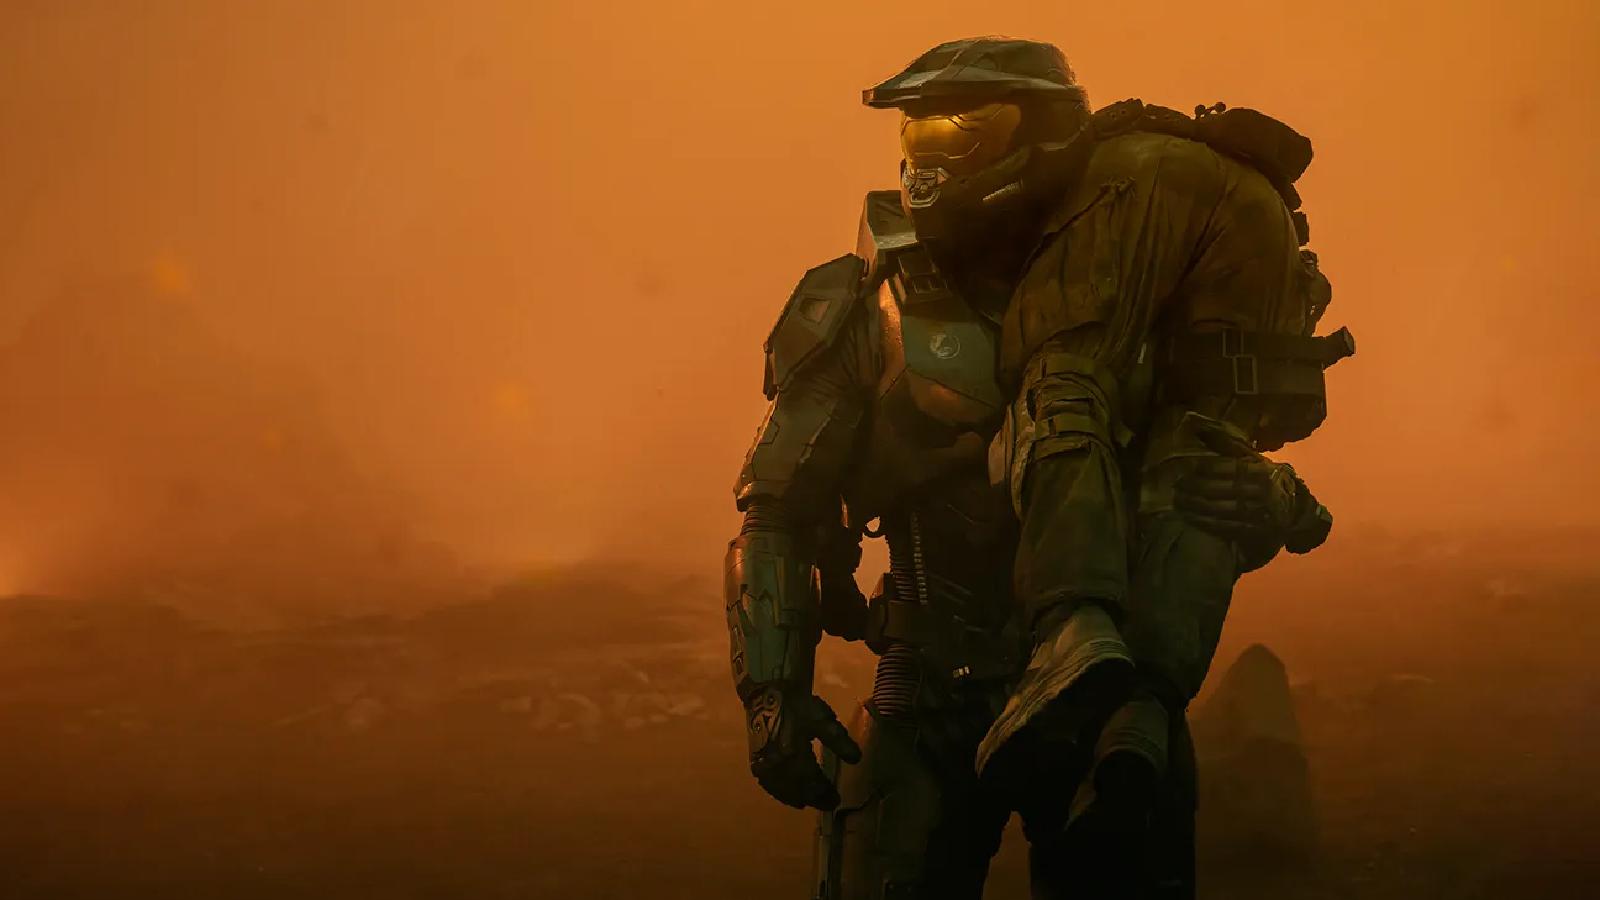 Everything we know about Halo The Series Season 2: Trailer, cast, release date, and more